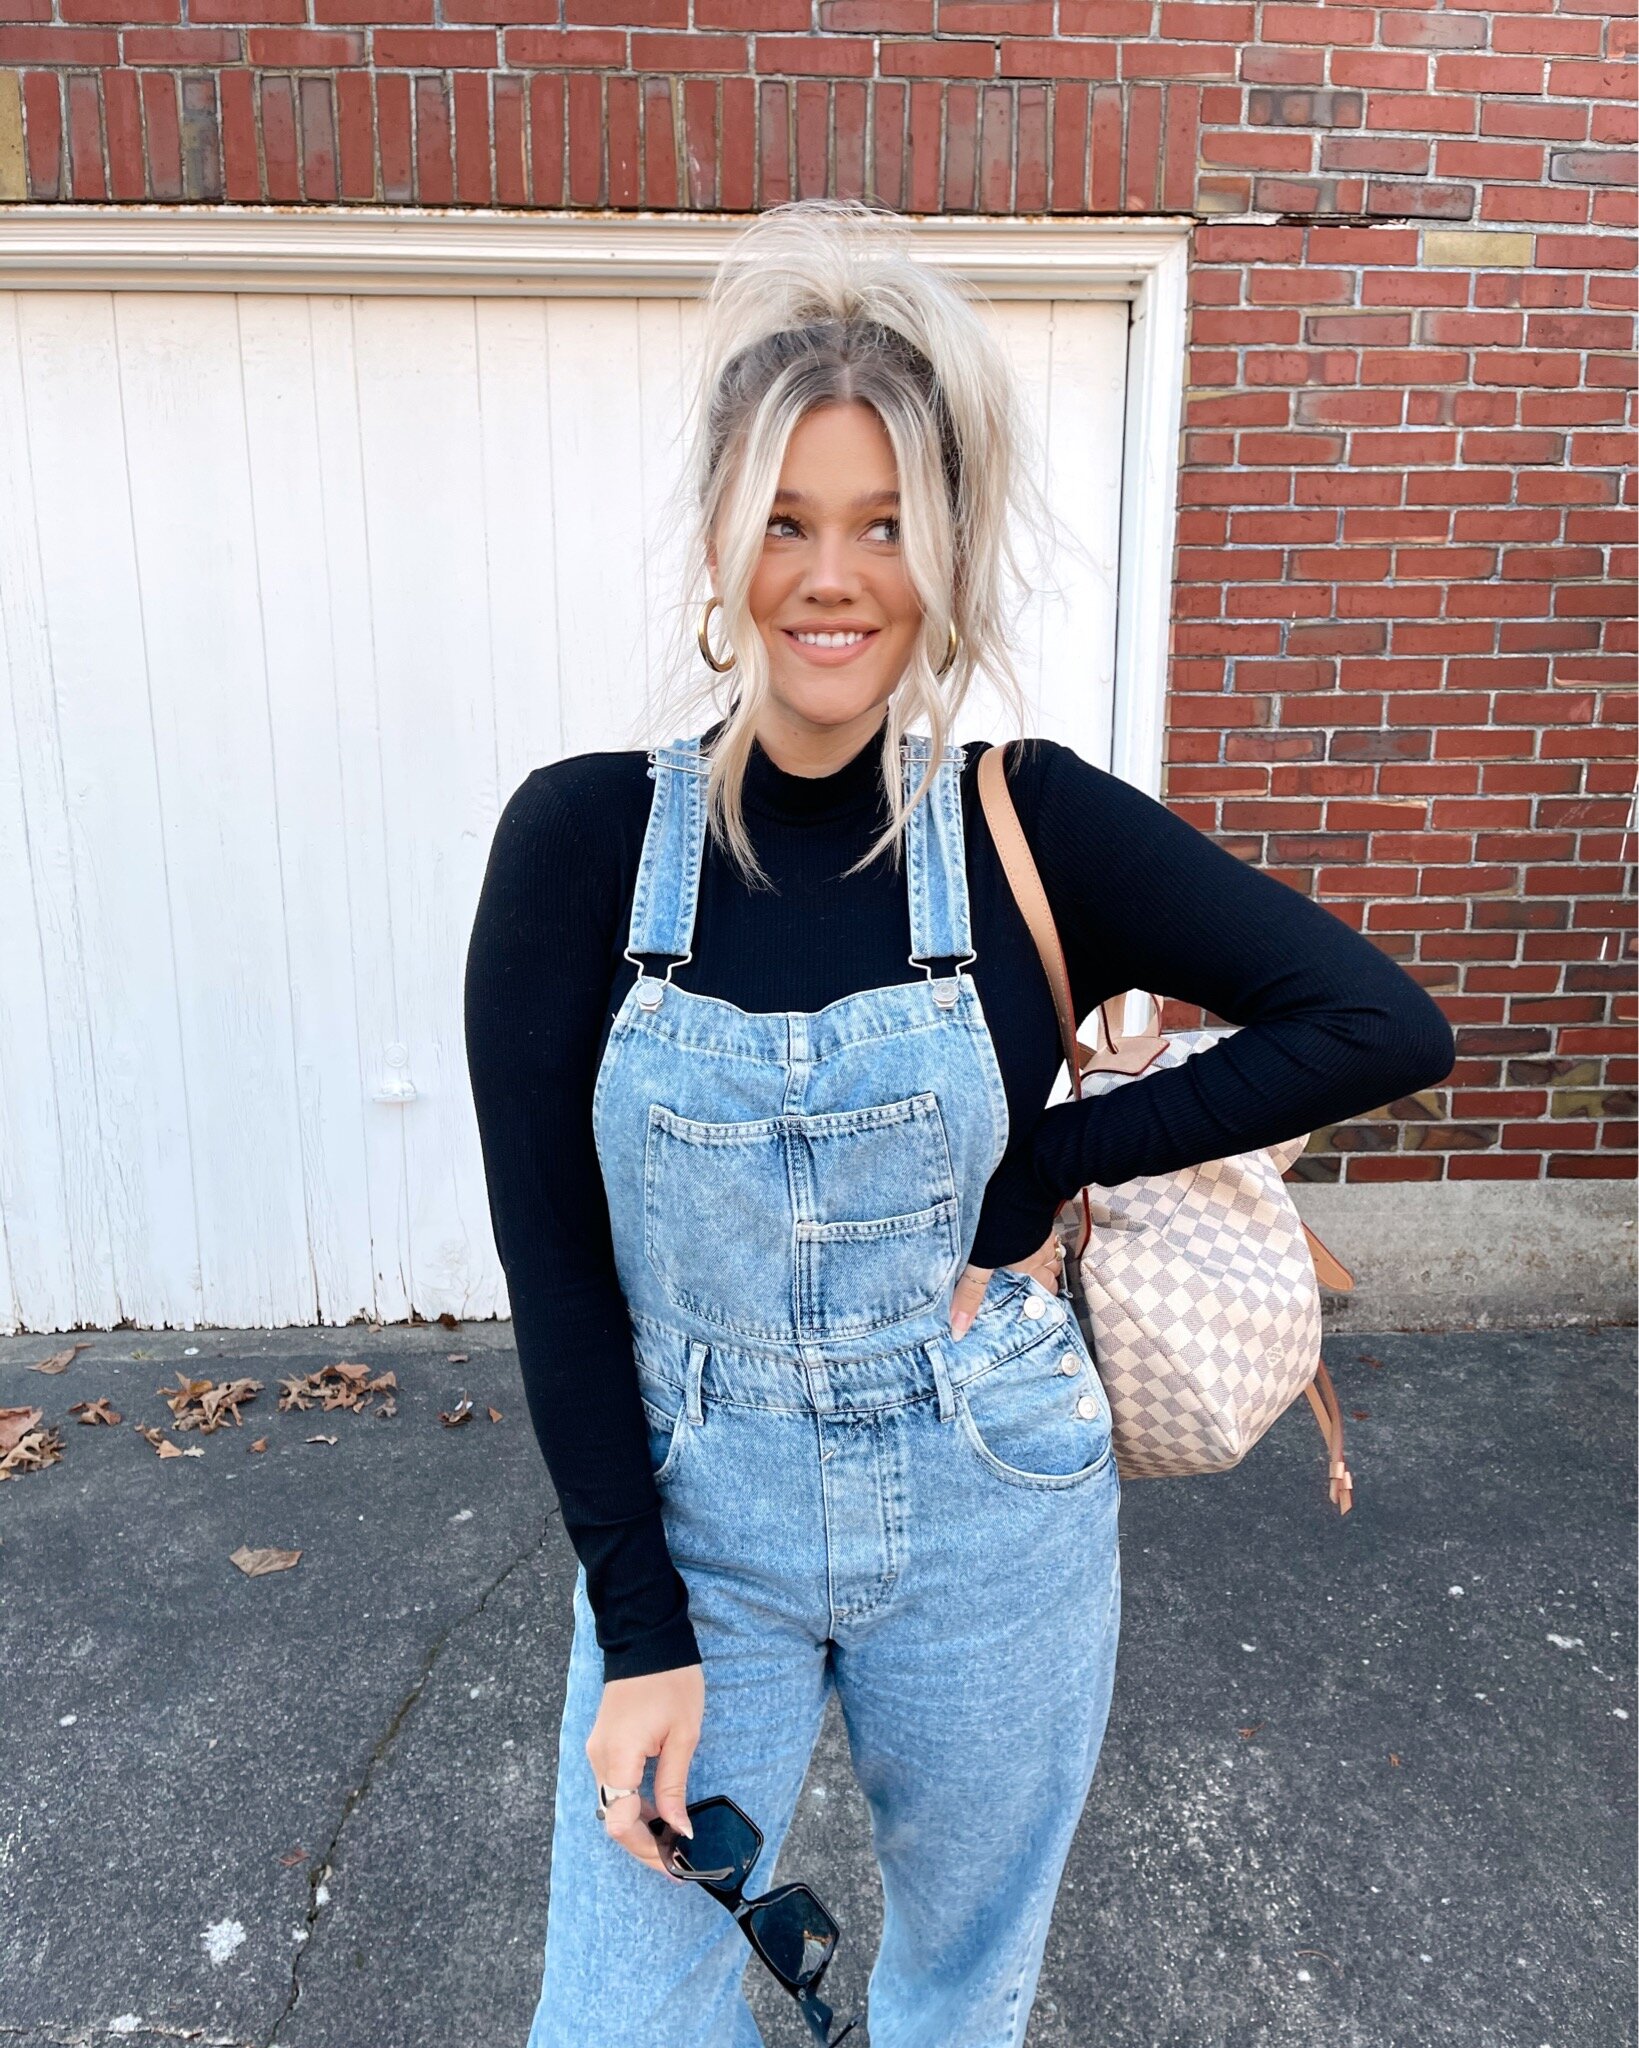 Recent Free People Purchases - Overalls - Bre Sheppard.JPG